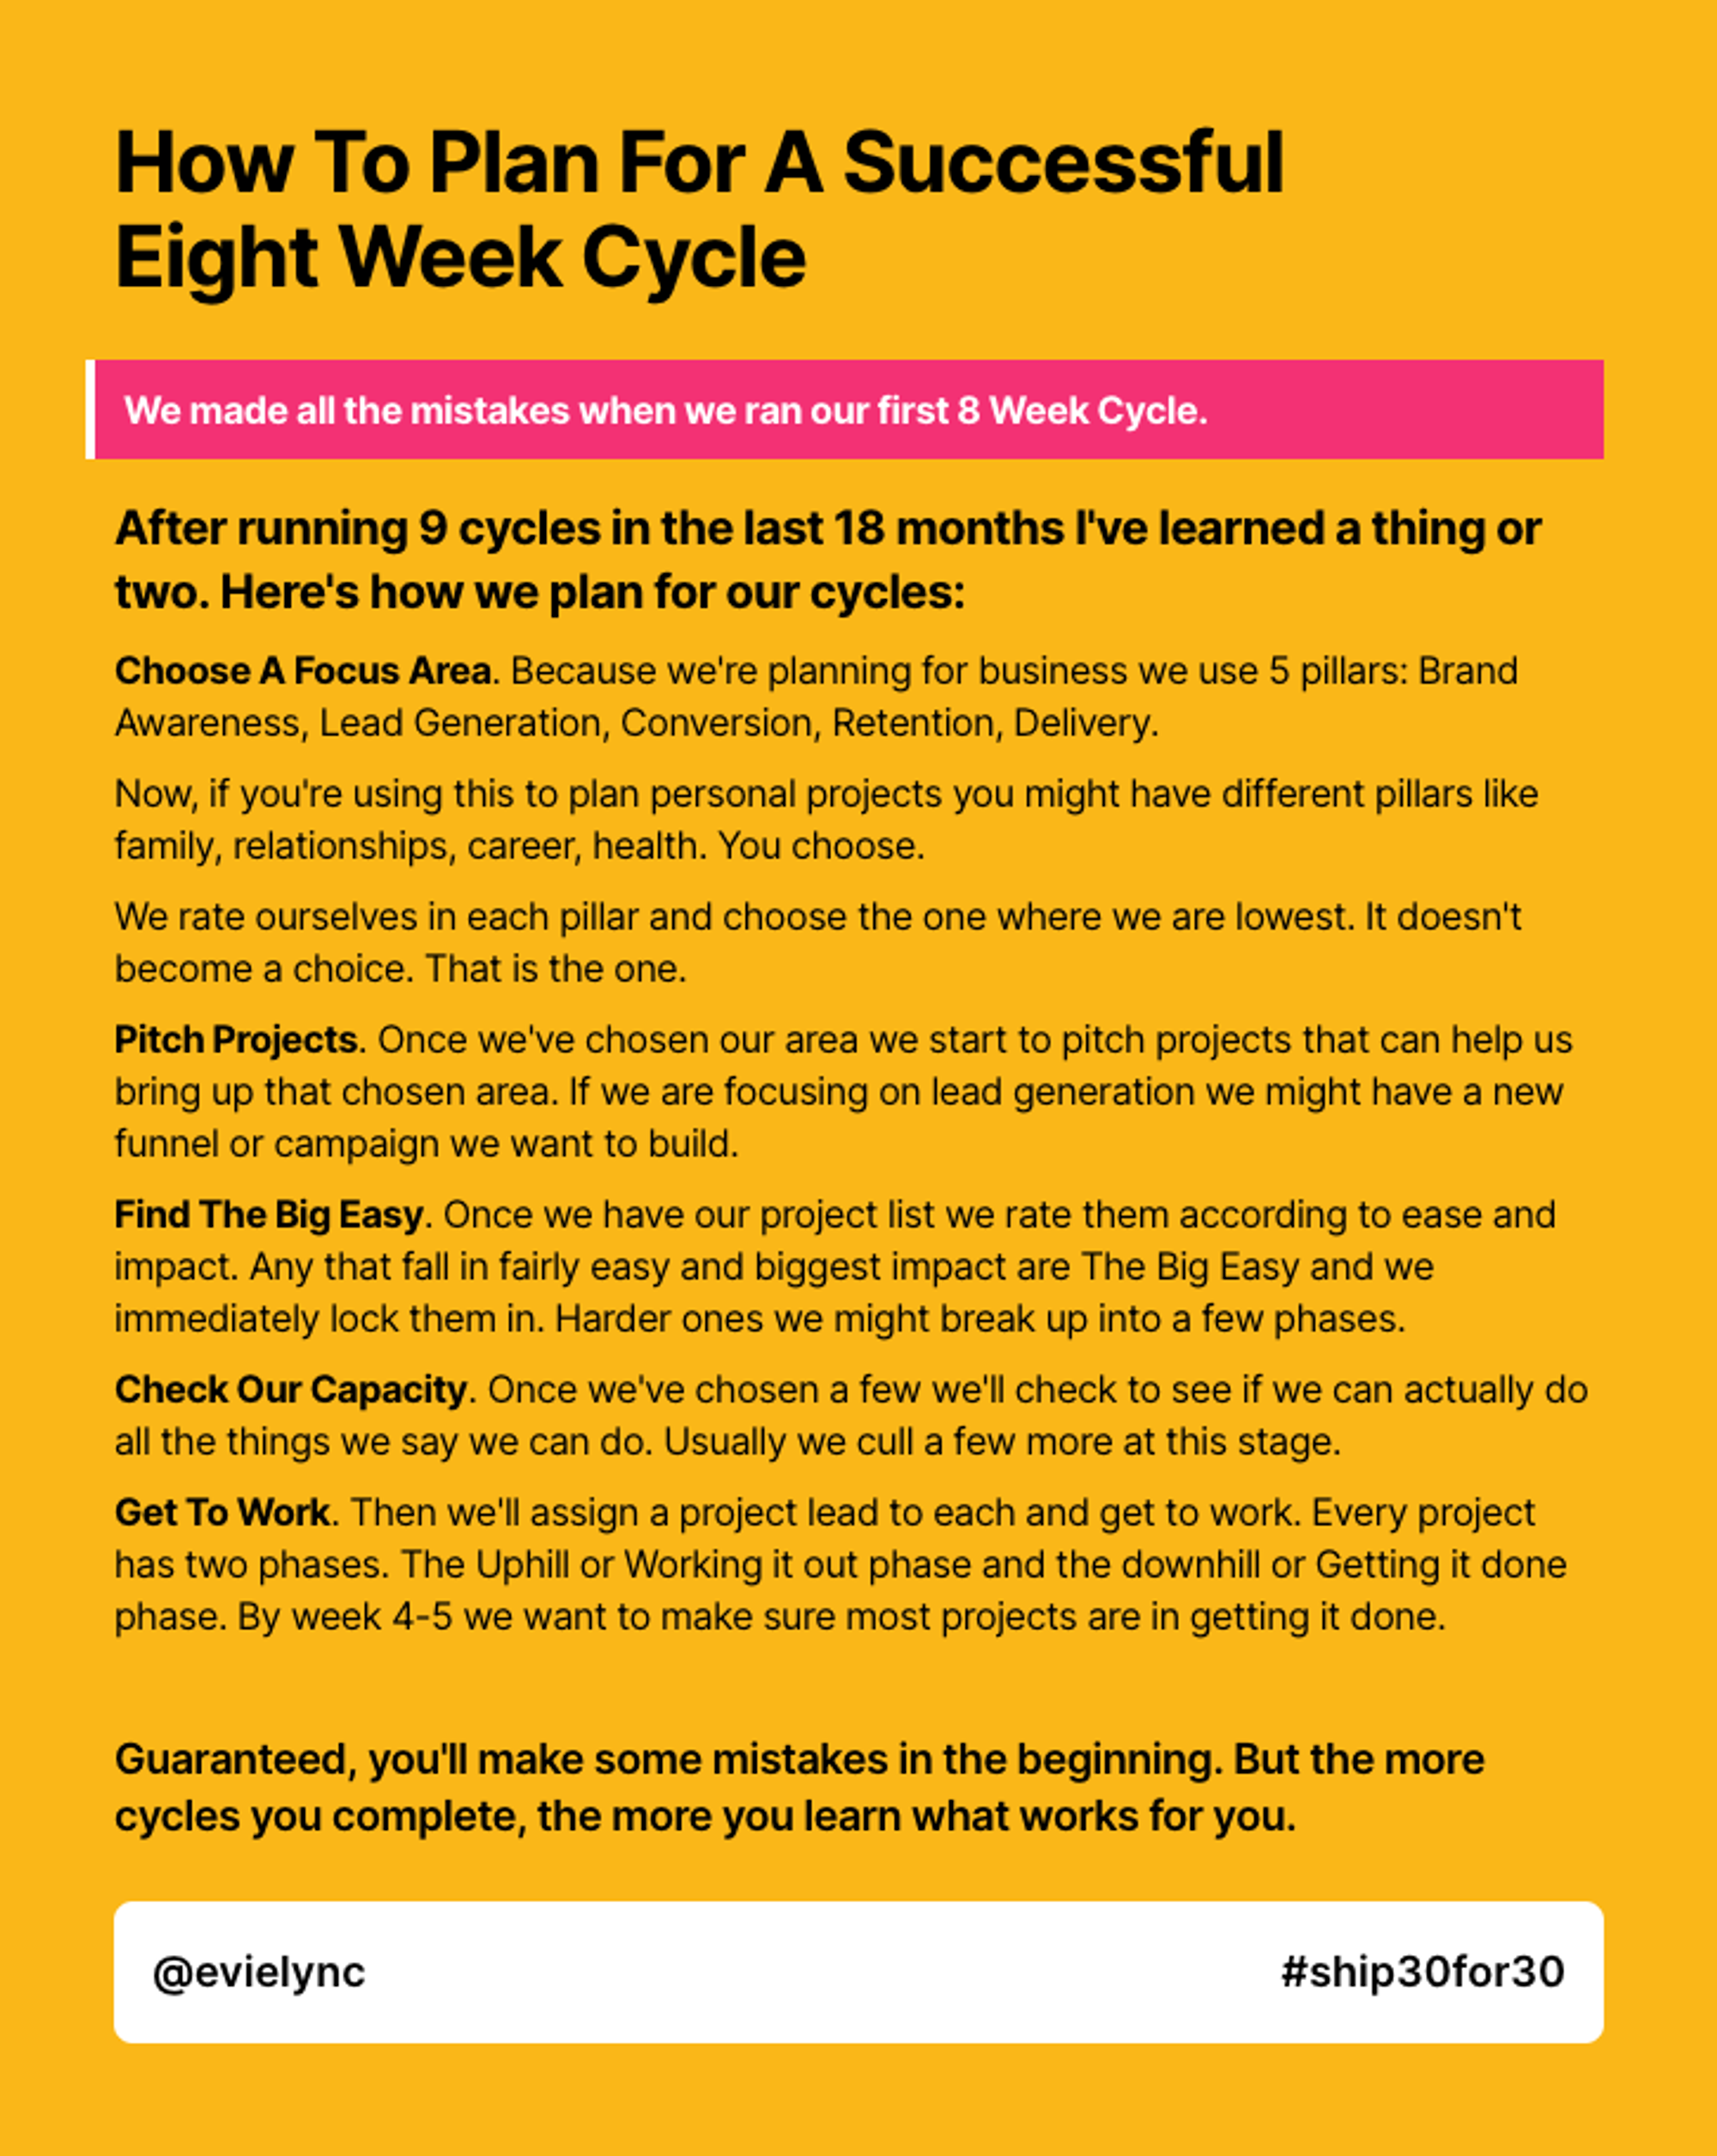 How To Plan For A Successful Eight Week Cycle